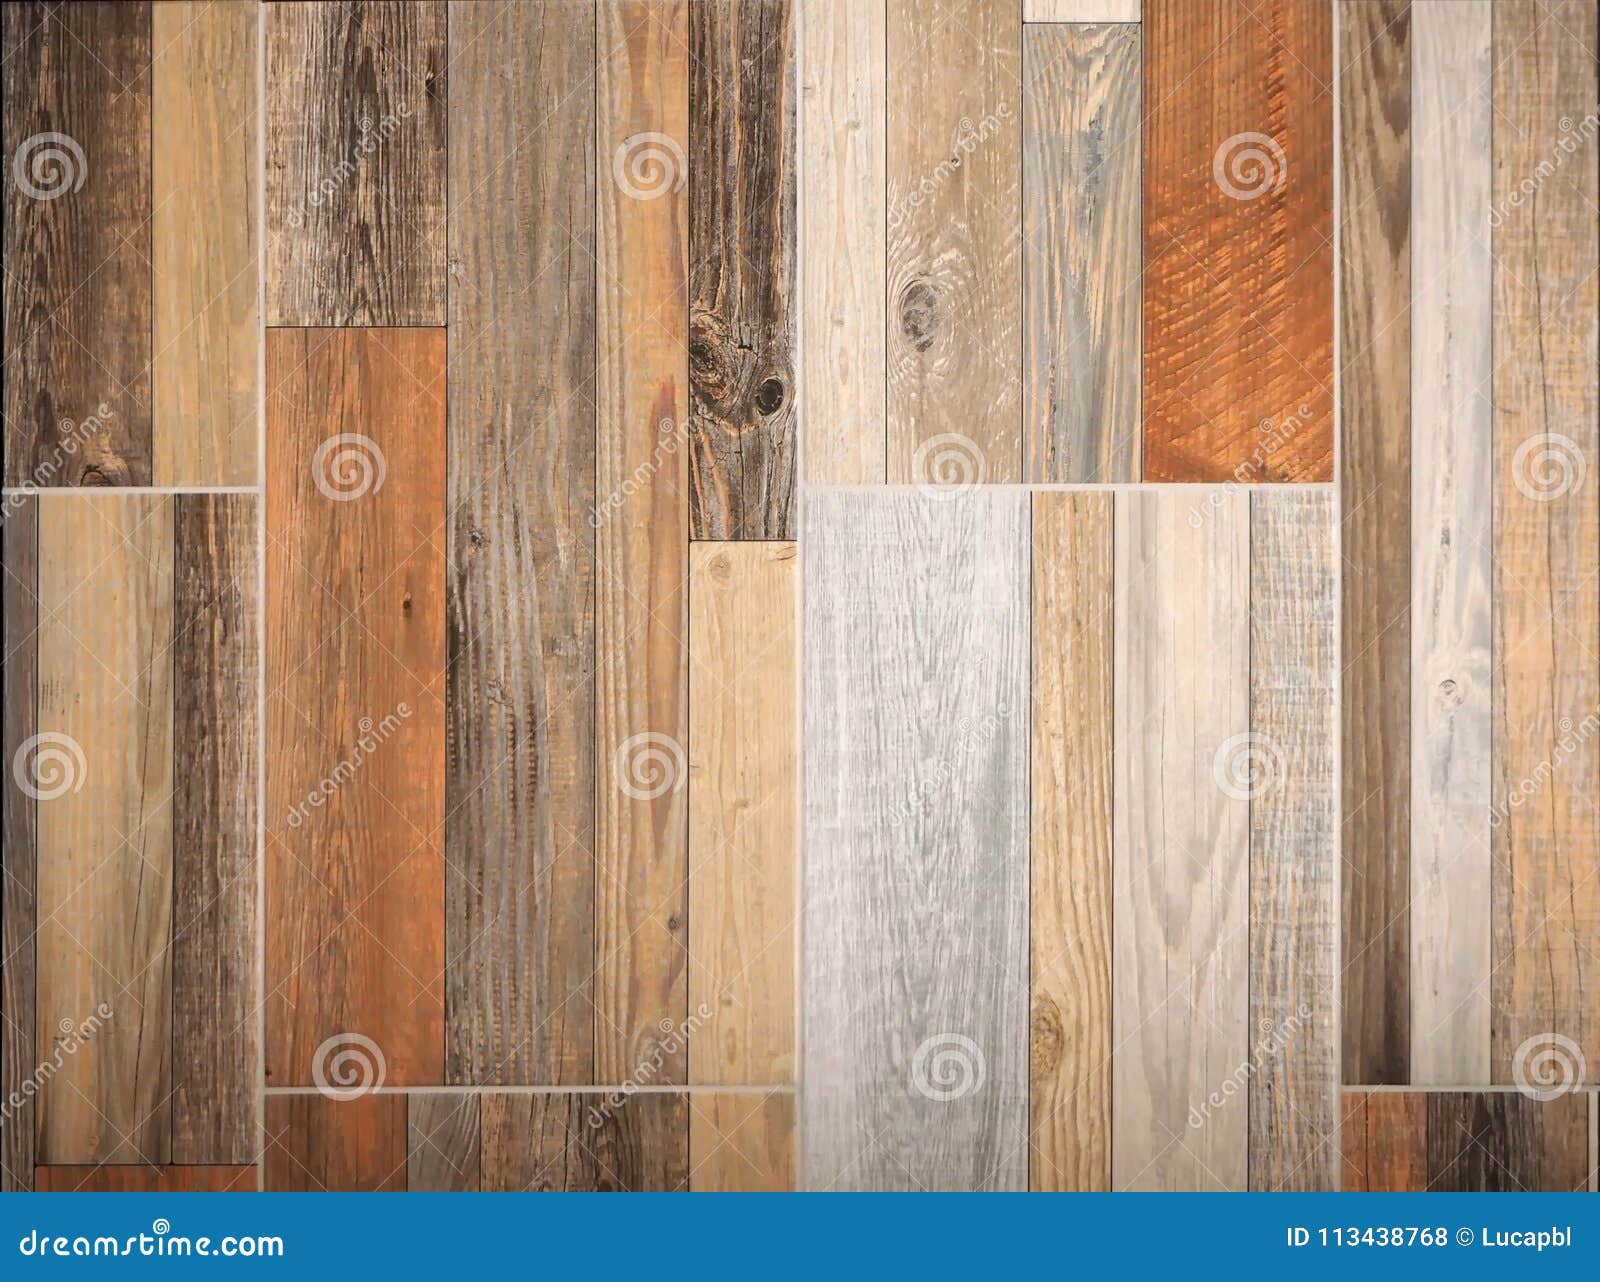 Wood Interior Wall Panel, with Laminates of Different Types, Sizes and Colors. Stock Photo